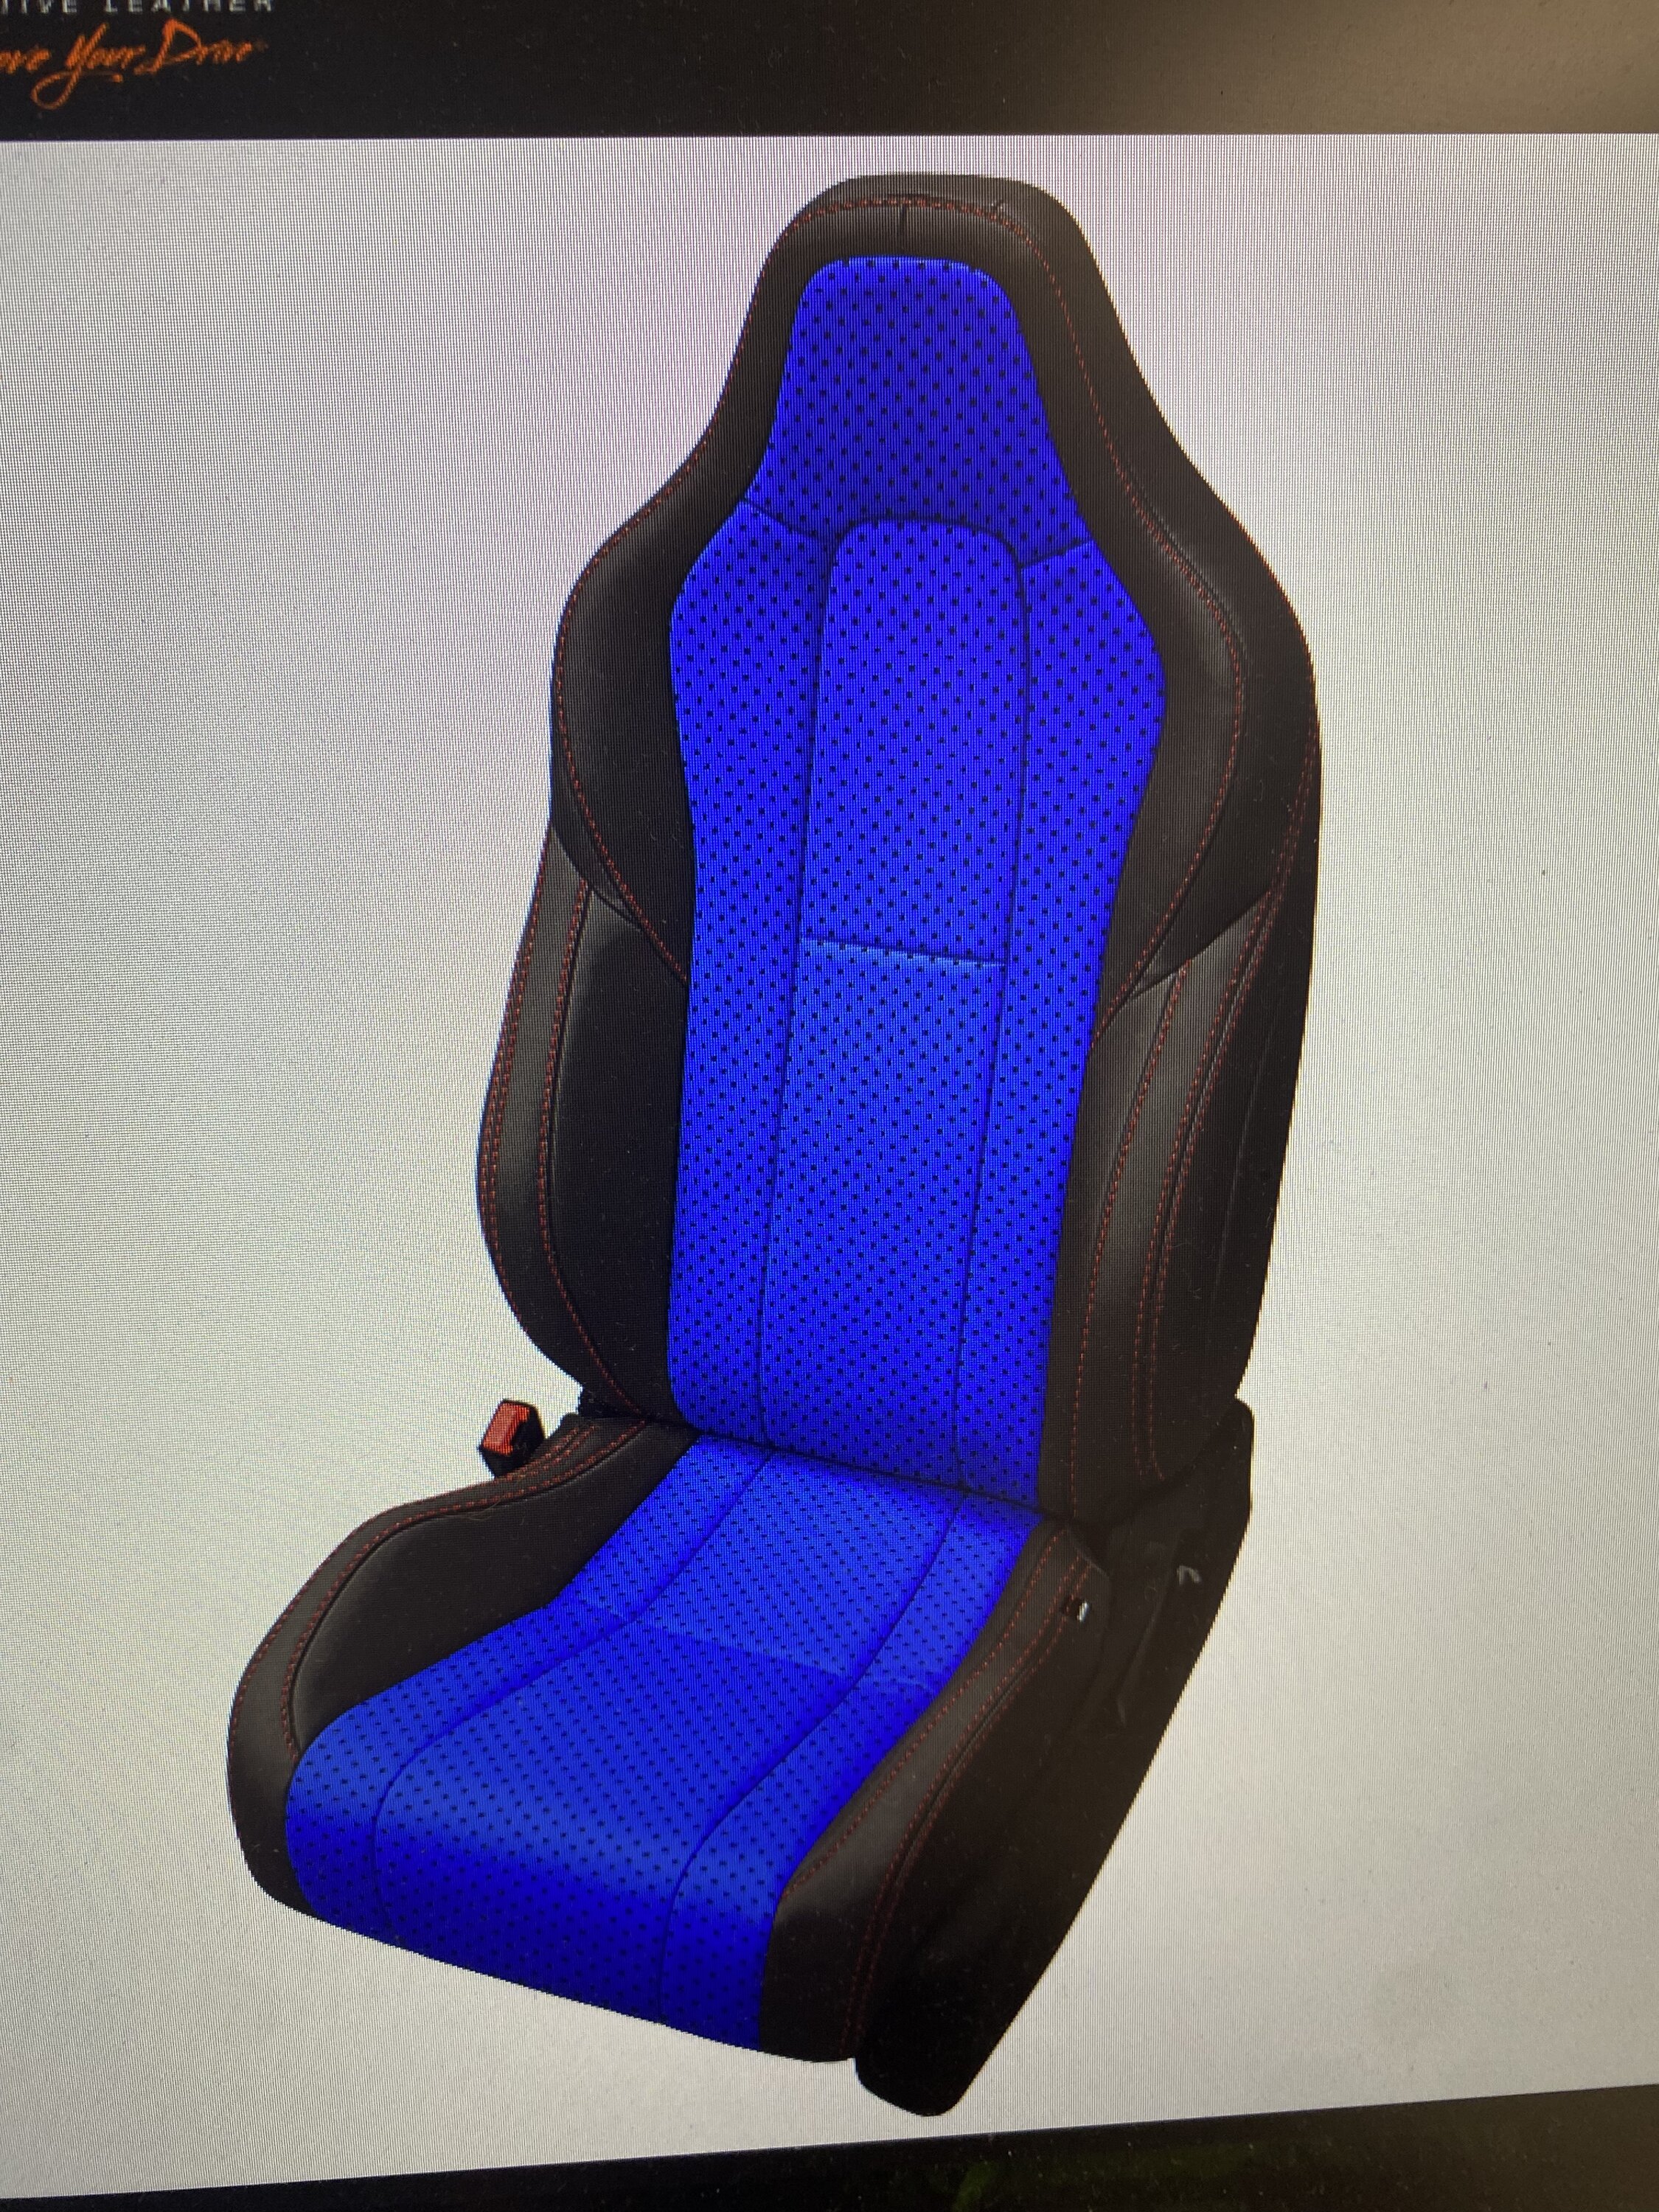 11th Gen Honda Civic Katzkin leather. Your opinion on color combo? I used to run a Chevy dealer and the guy who is installing has done 100s of katzkin jobs for me. 56696222-2337-48A7-8EF0-698687C6FF5C